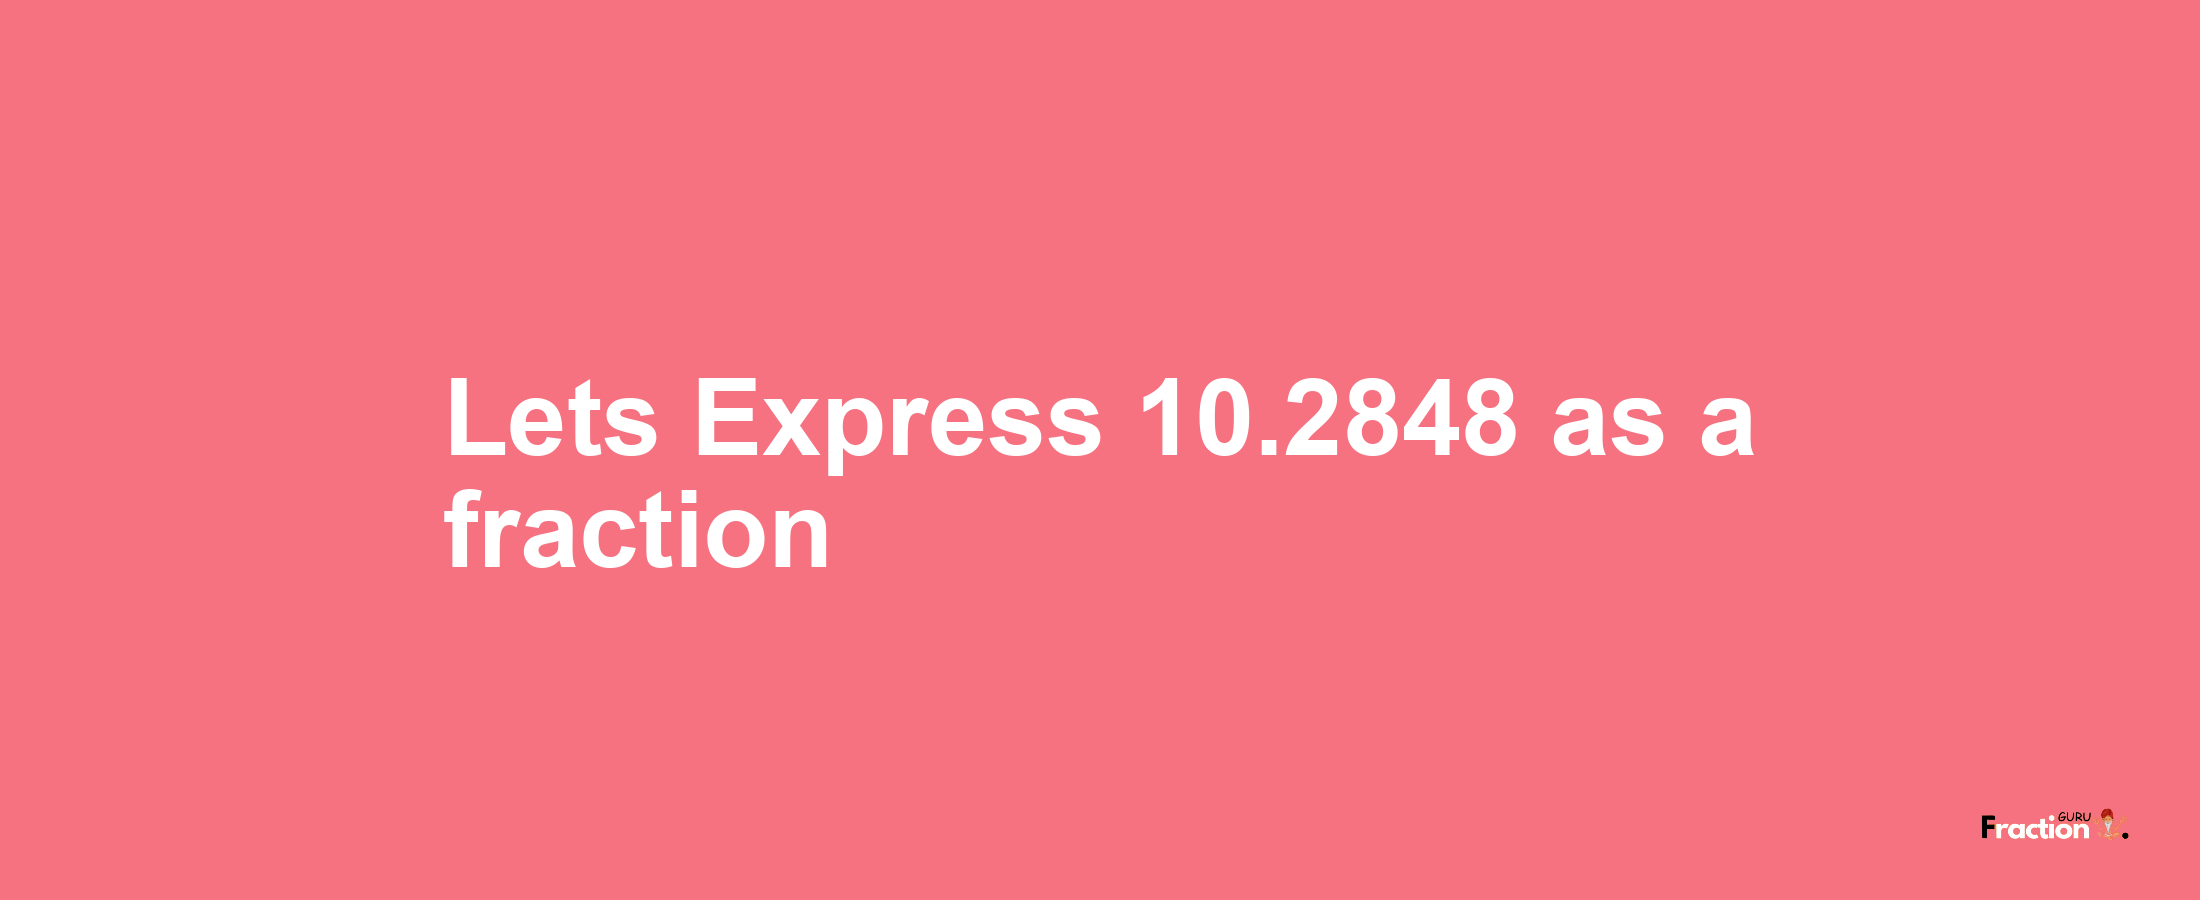 Lets Express 10.2848 as afraction